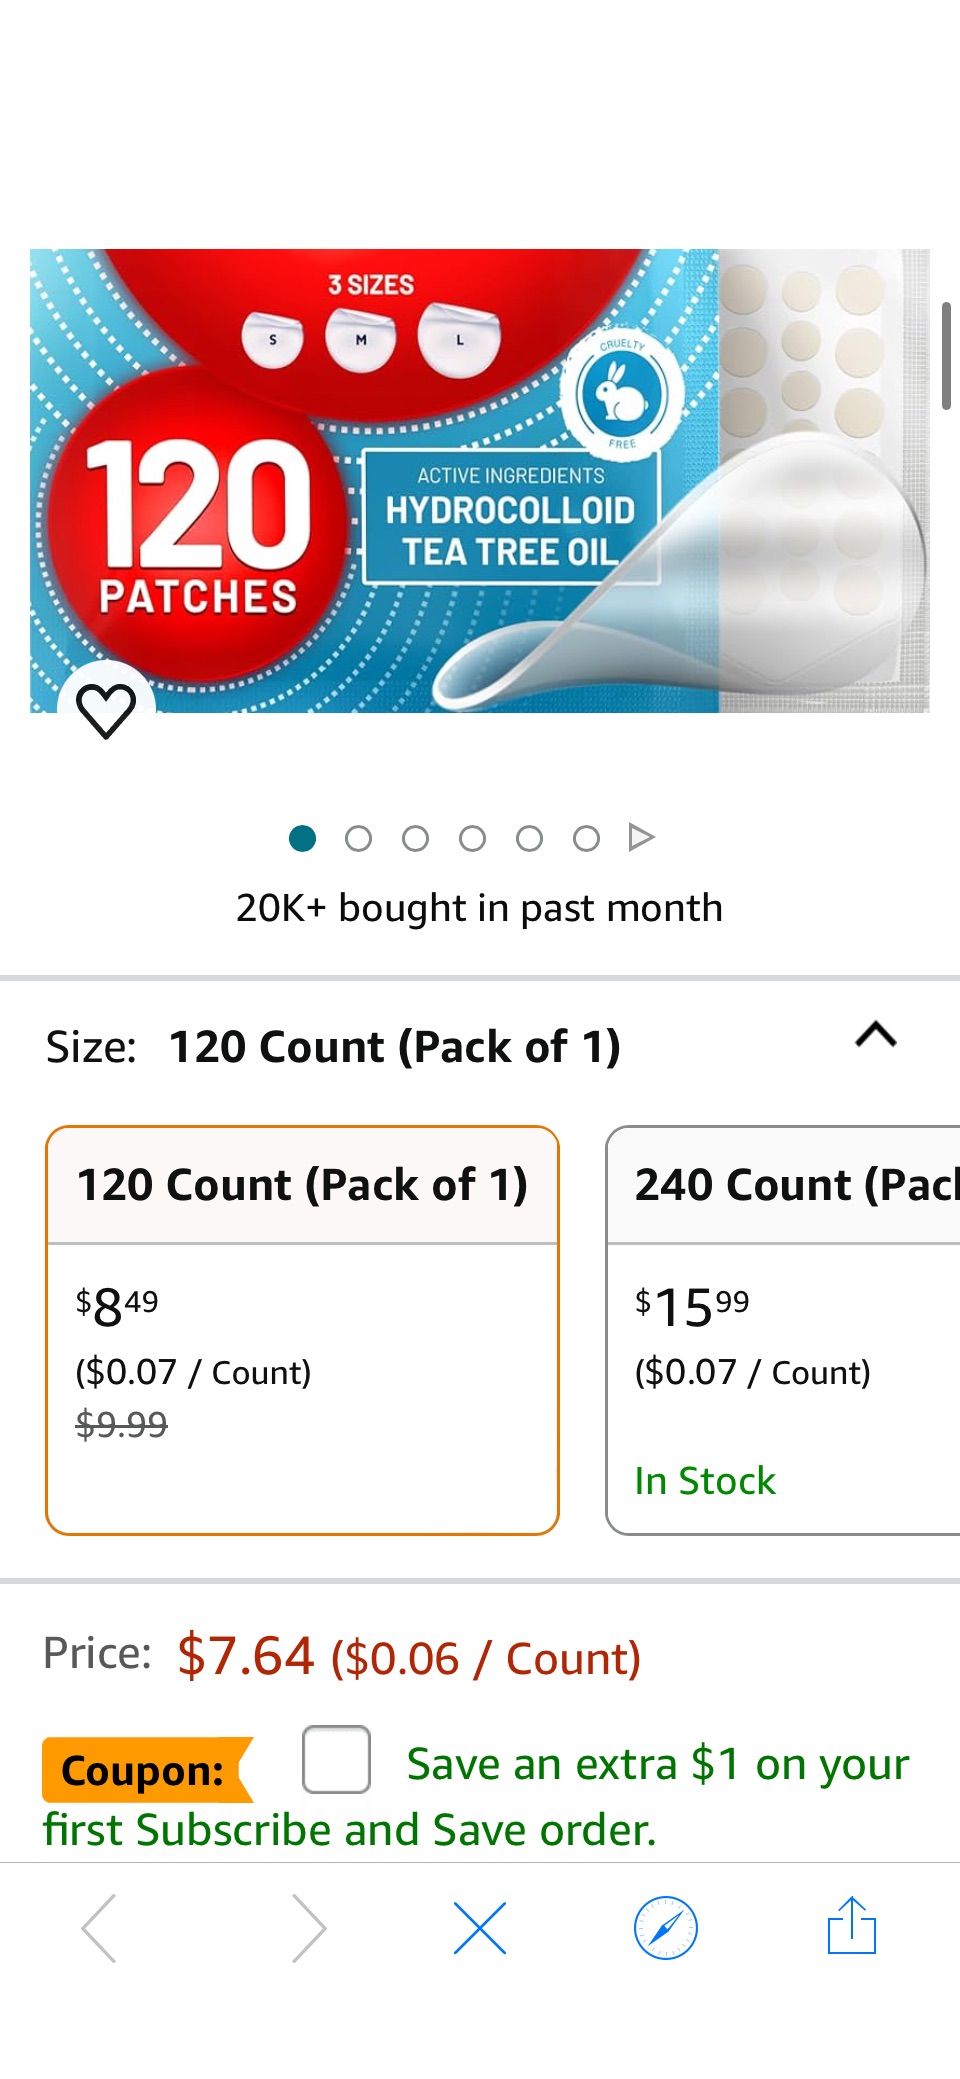 Amazon.com: KEYCONCEPTS Pimple Patches for Face (120 Pack), Hydrocolloid Acne Patches with Tea Tree Oil - Pimple Patch Zit Patch and Pimple Stickers - Hydrocolloid Acne Dots for Acne - Zit Patches : B